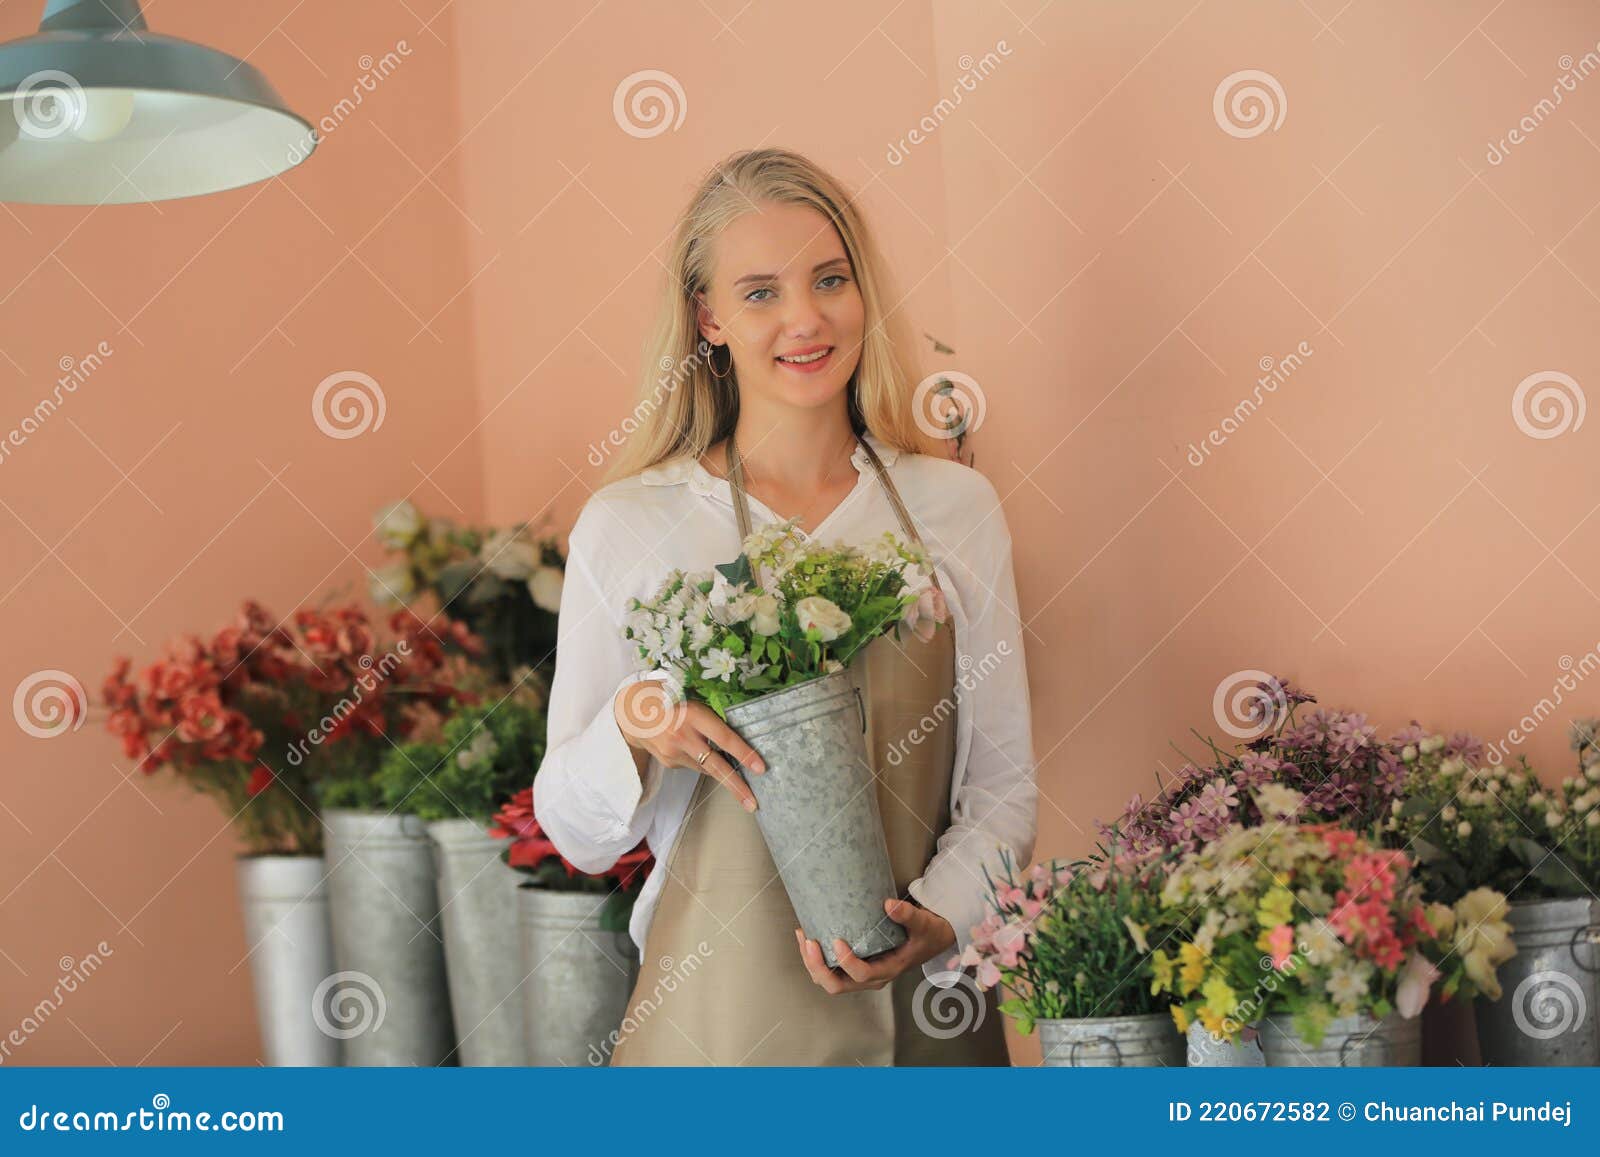 beautiful blonde hair girl standing with confidence in front of flower in open retails flora shop. small business owner concept